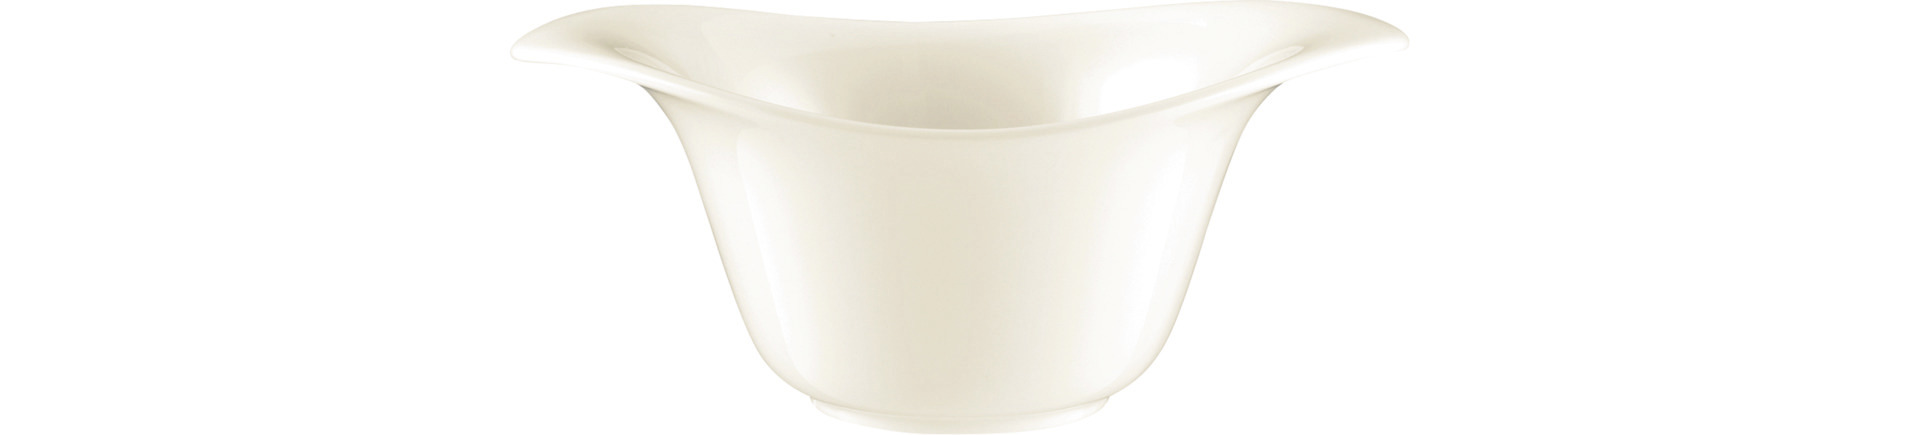 Eventbowl Diamant 18 cm oval weiss